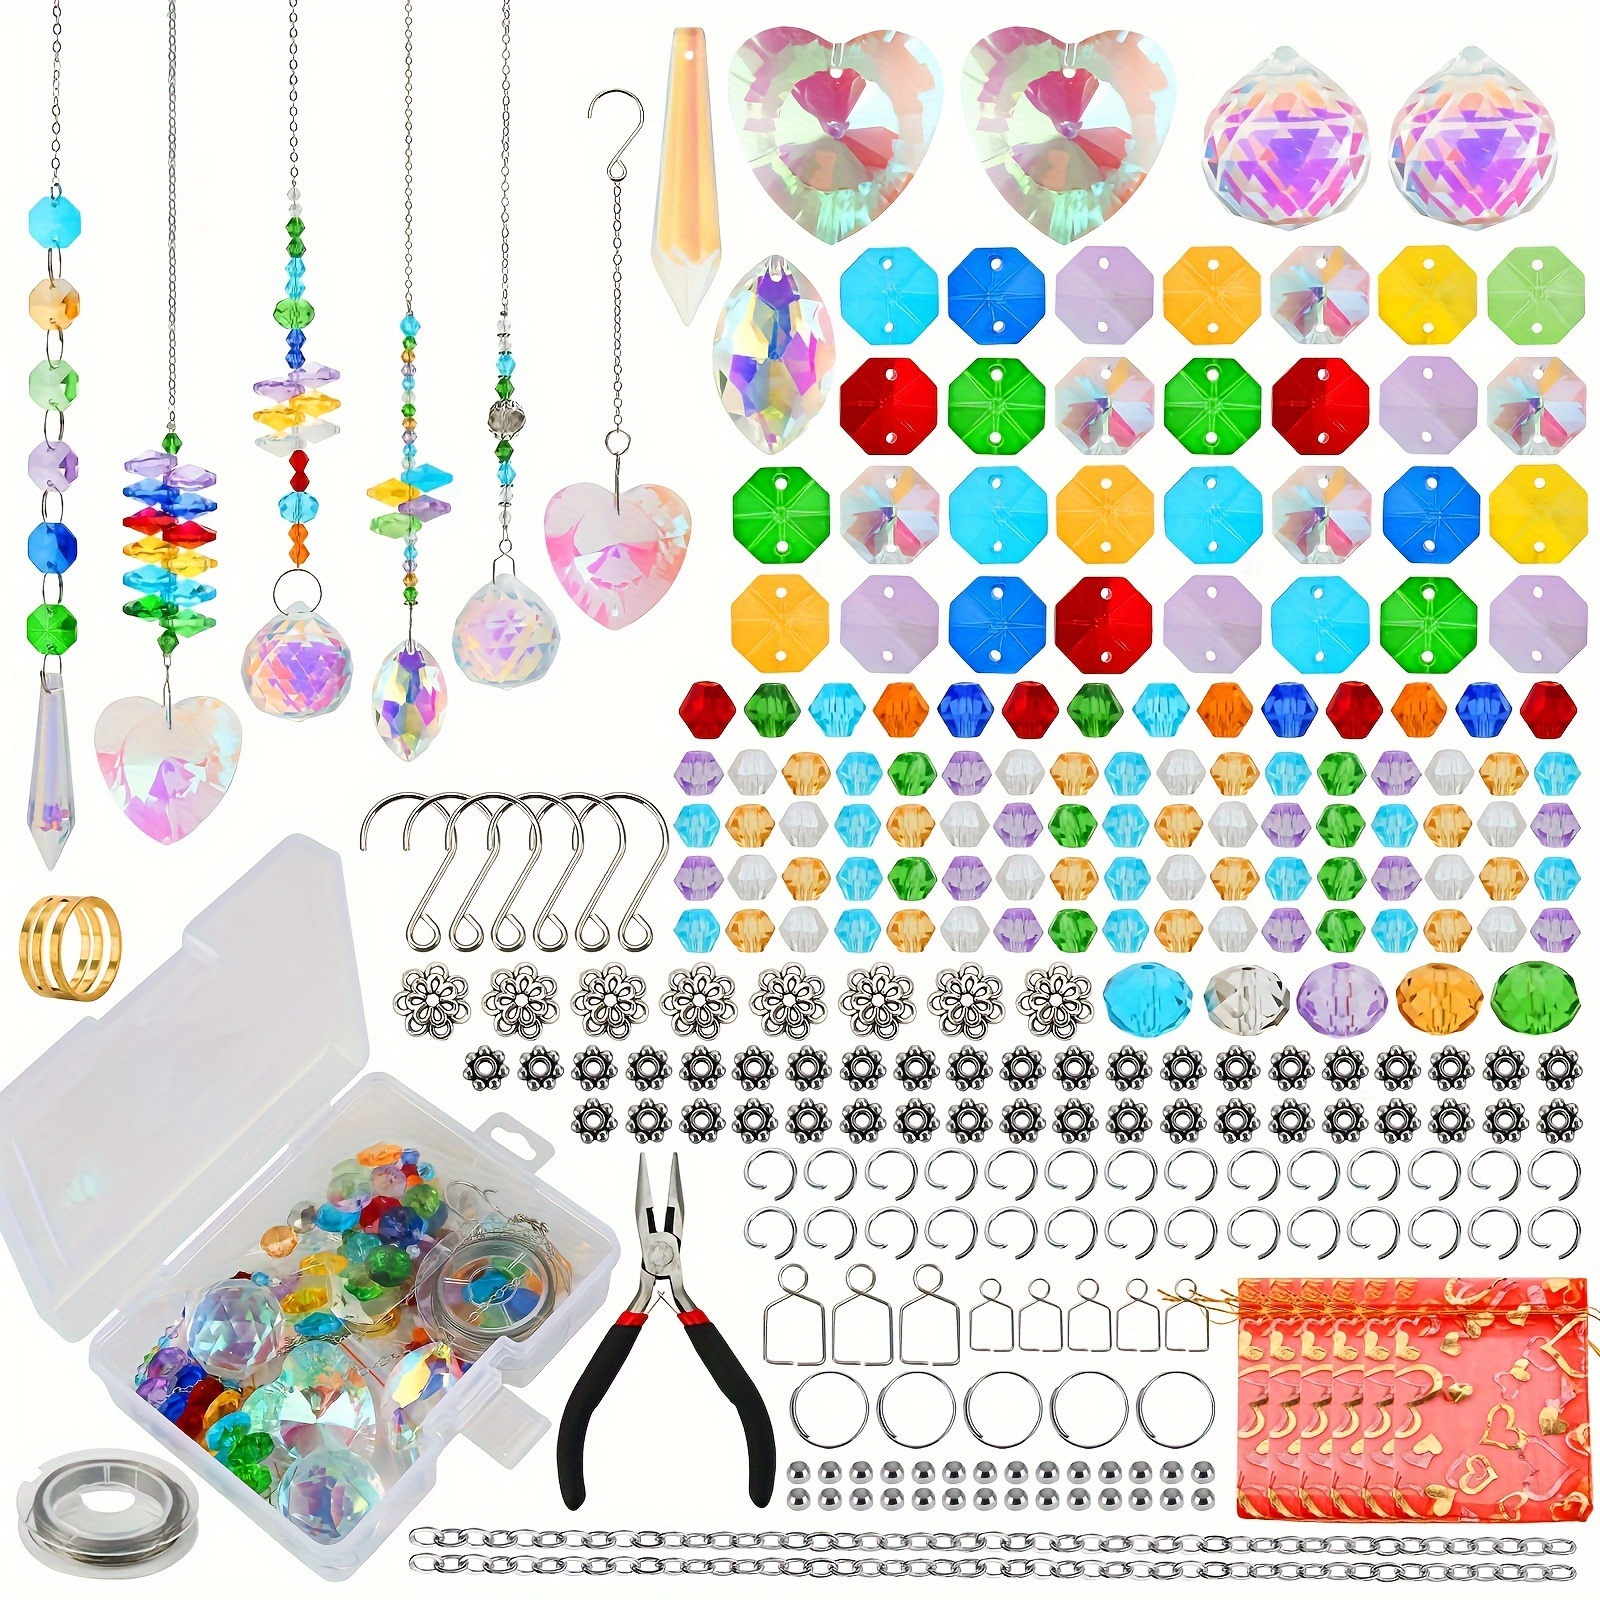 

460-piece Diy Suncatcher Kit With Colorful Crystal Beads & Rainbow Prism - Perfect For Window Hangings, Indoor/outdoor Garden Decor